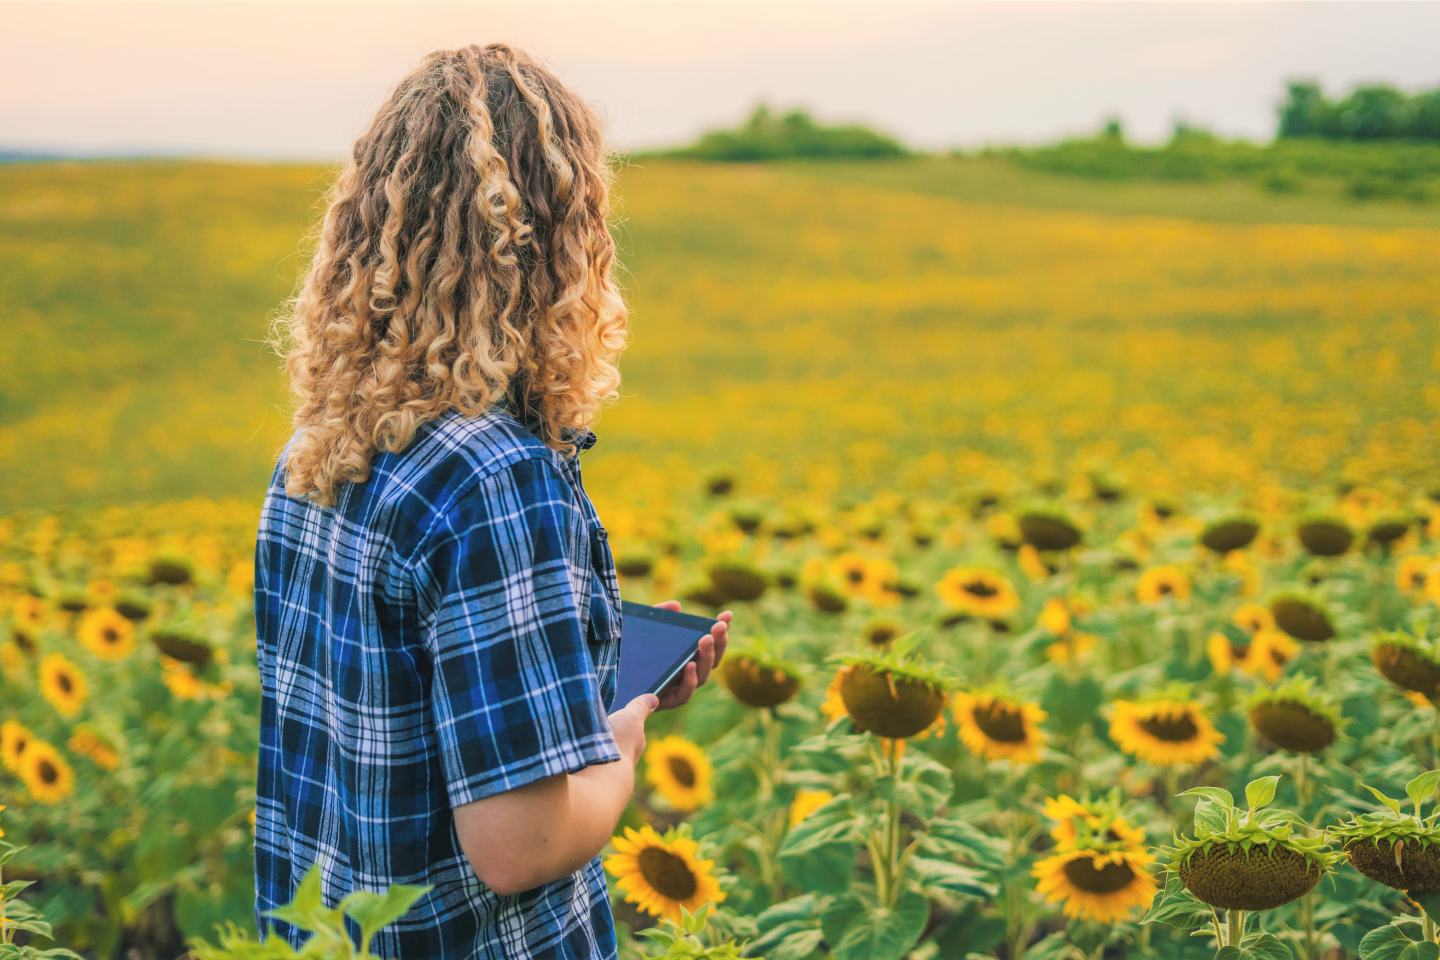 Blond woman with blue shirt stands in field of sunflowers. Sustainability CSR green company. 